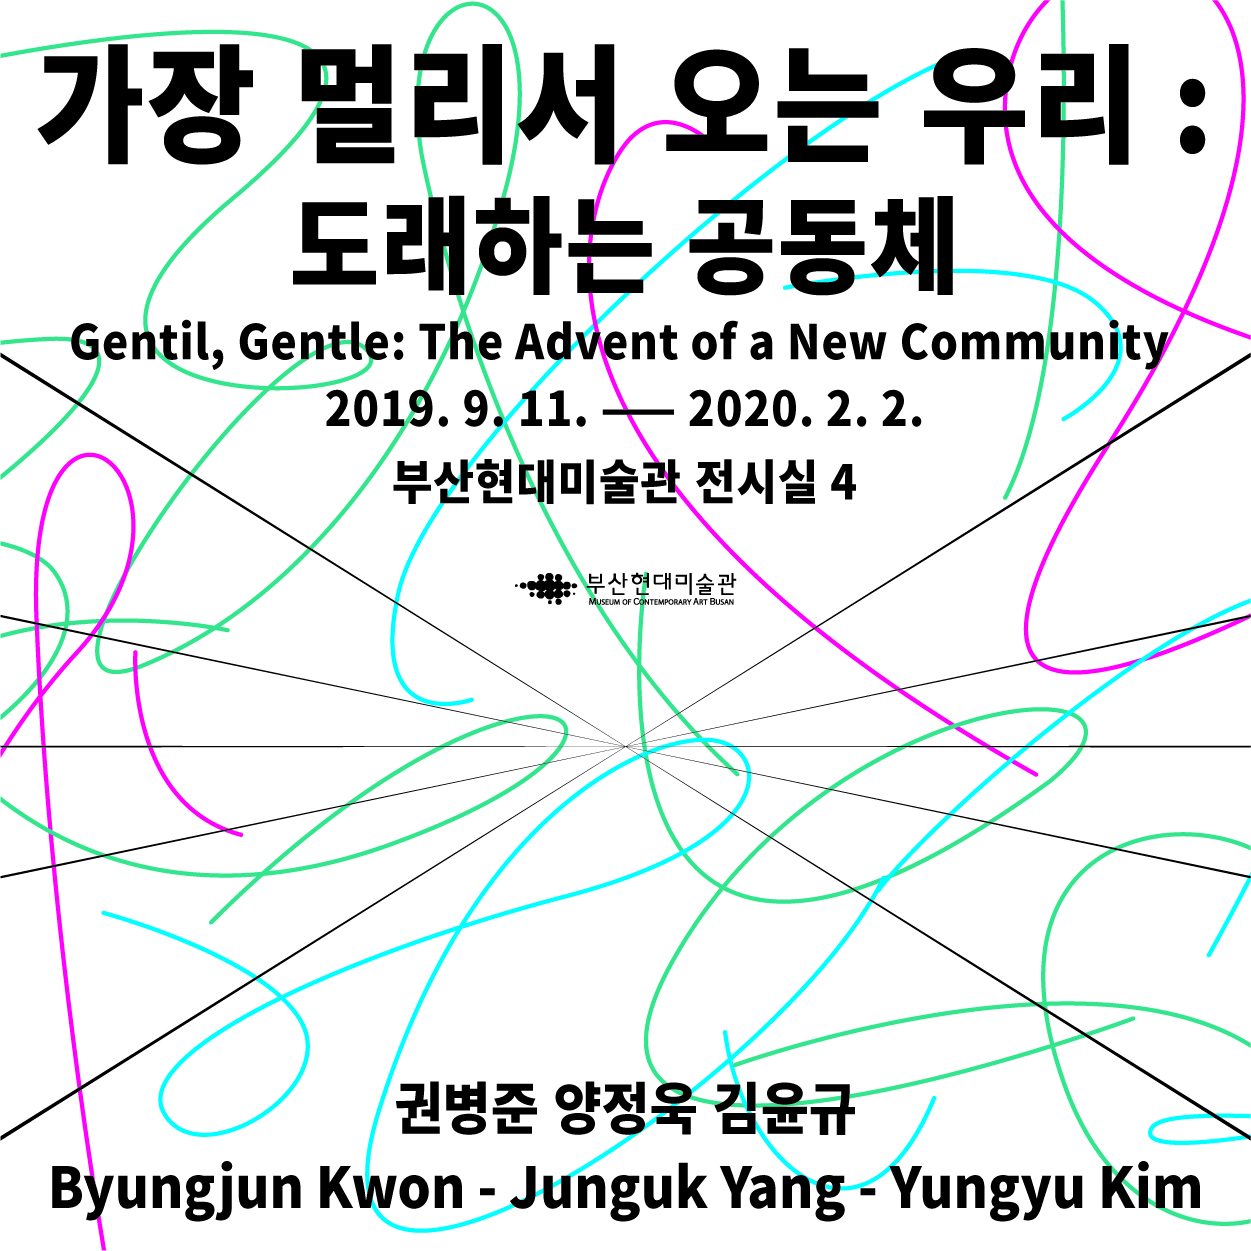 《Gentil, Gentle: The Advent of a New Community》썸네일